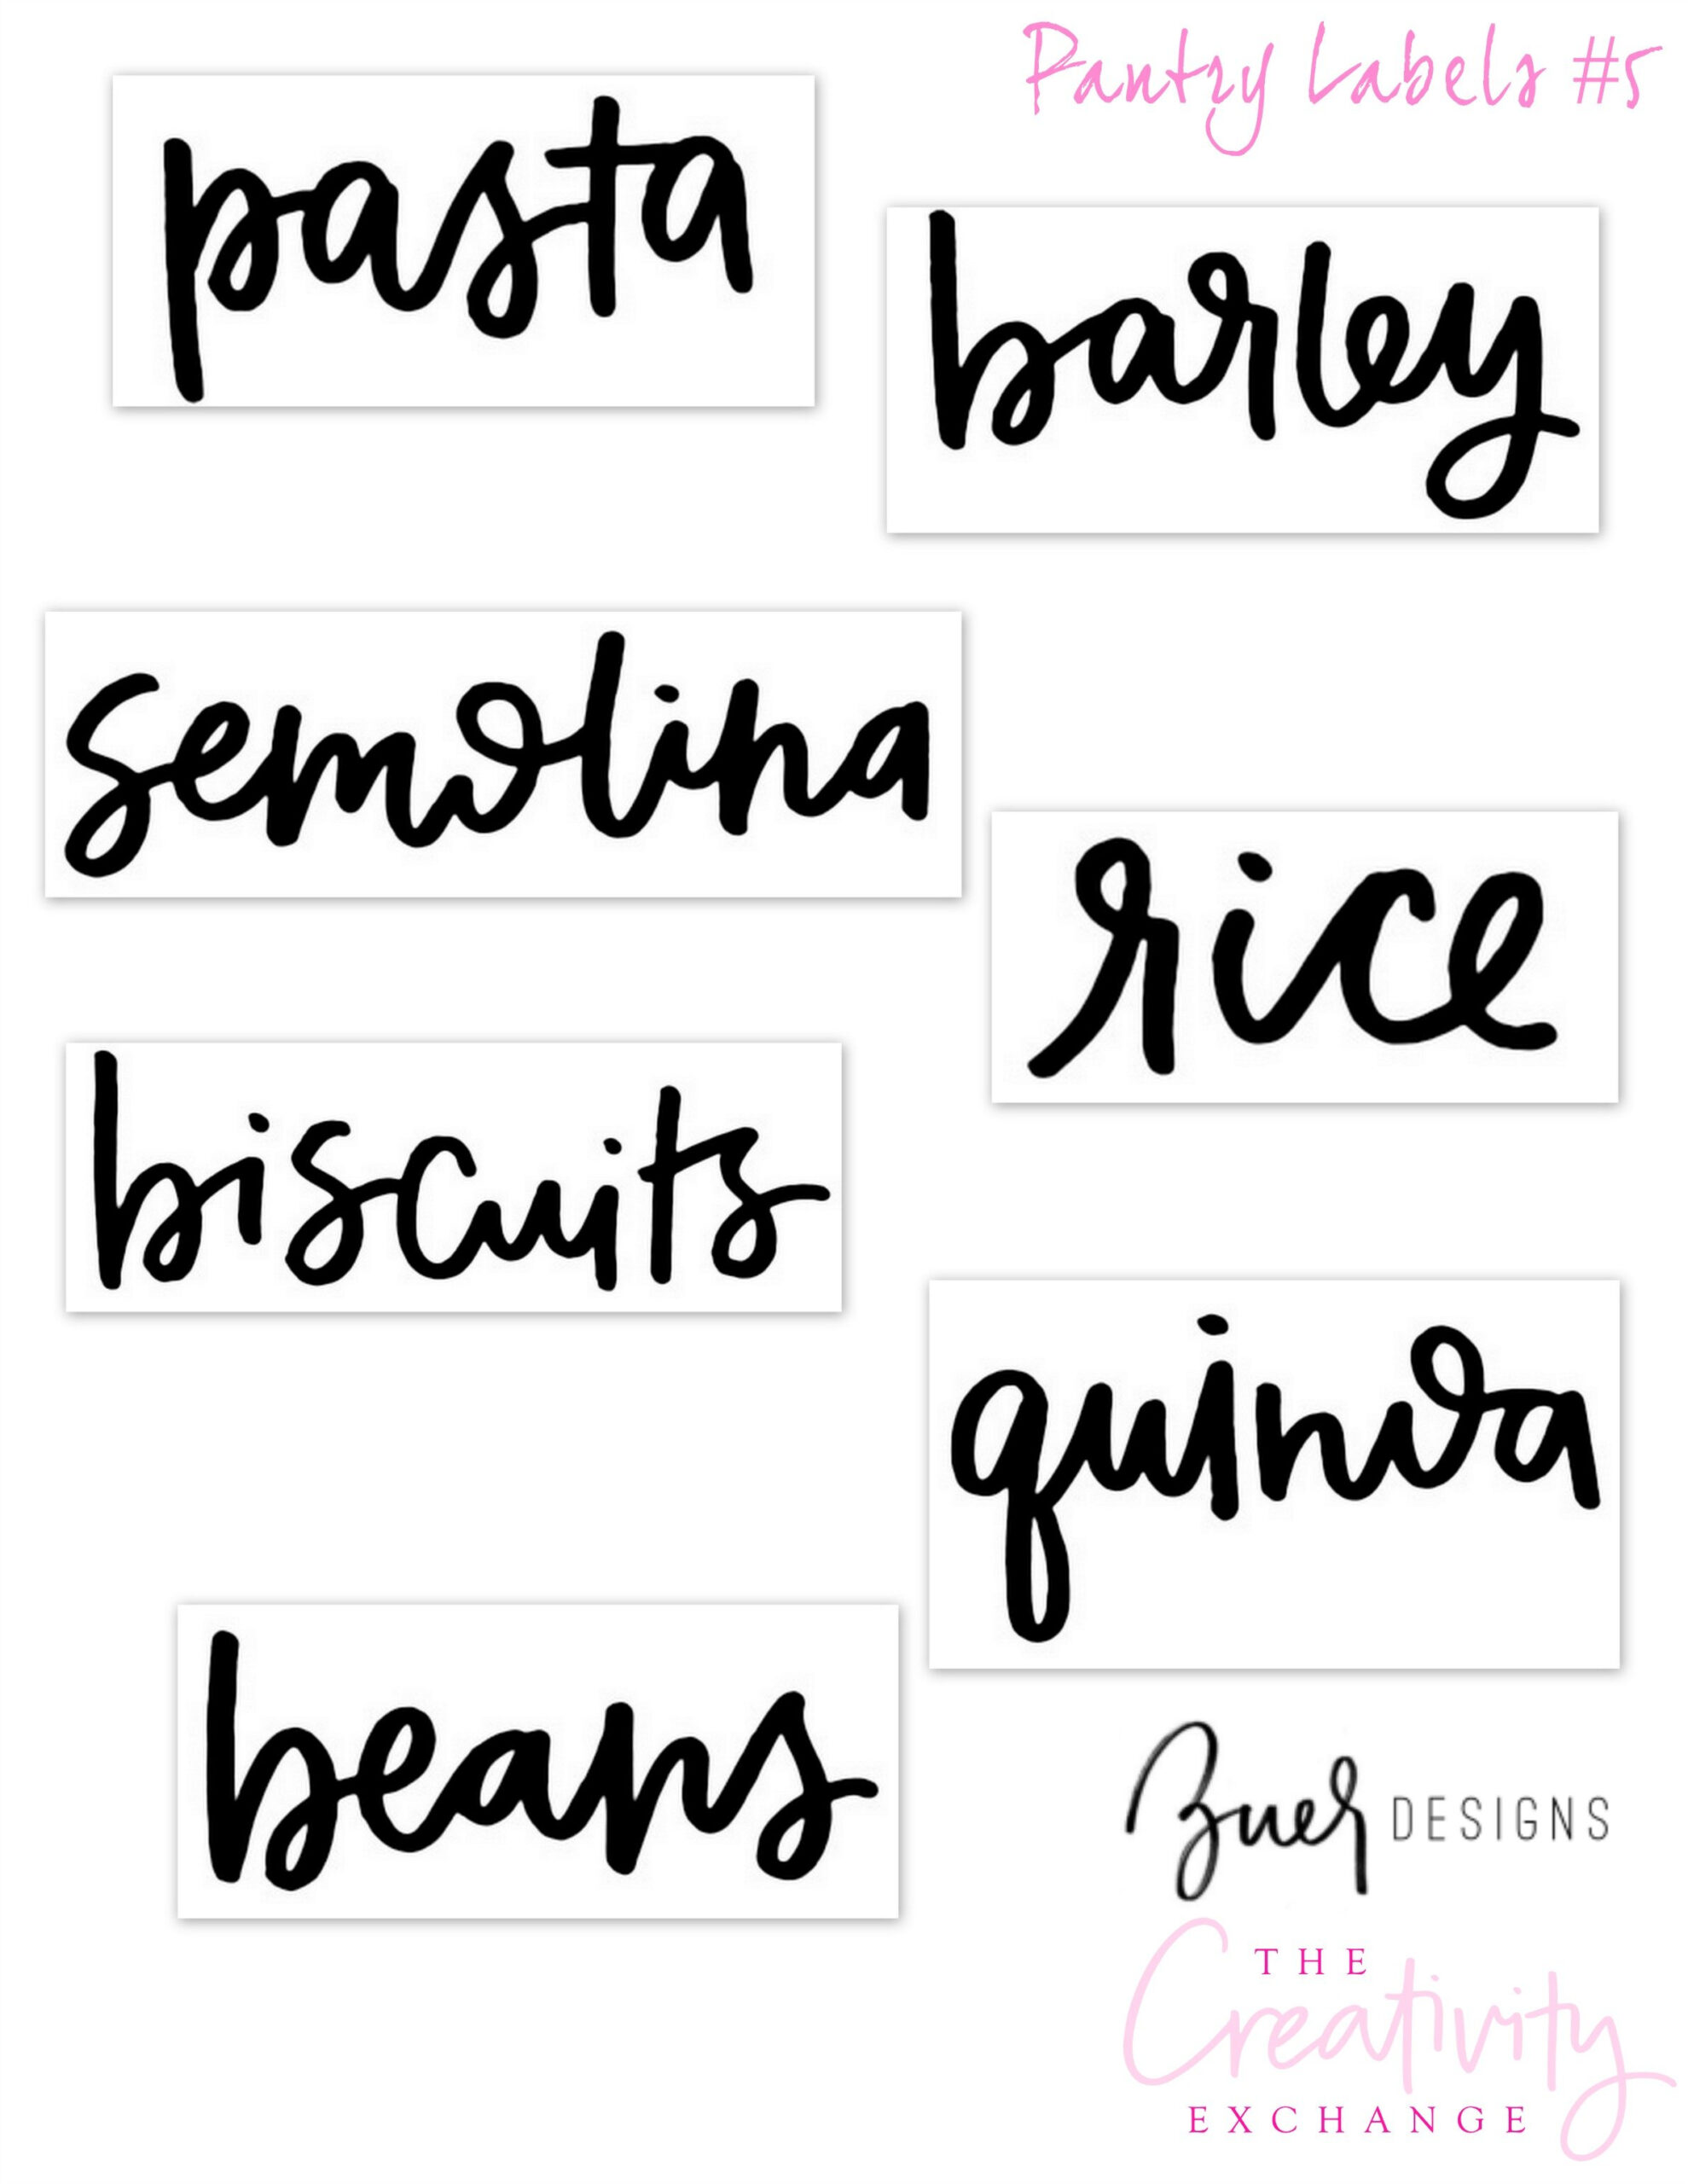 Free Printable Pantry Labels Hand Lettered By Zuer Designs Print On 